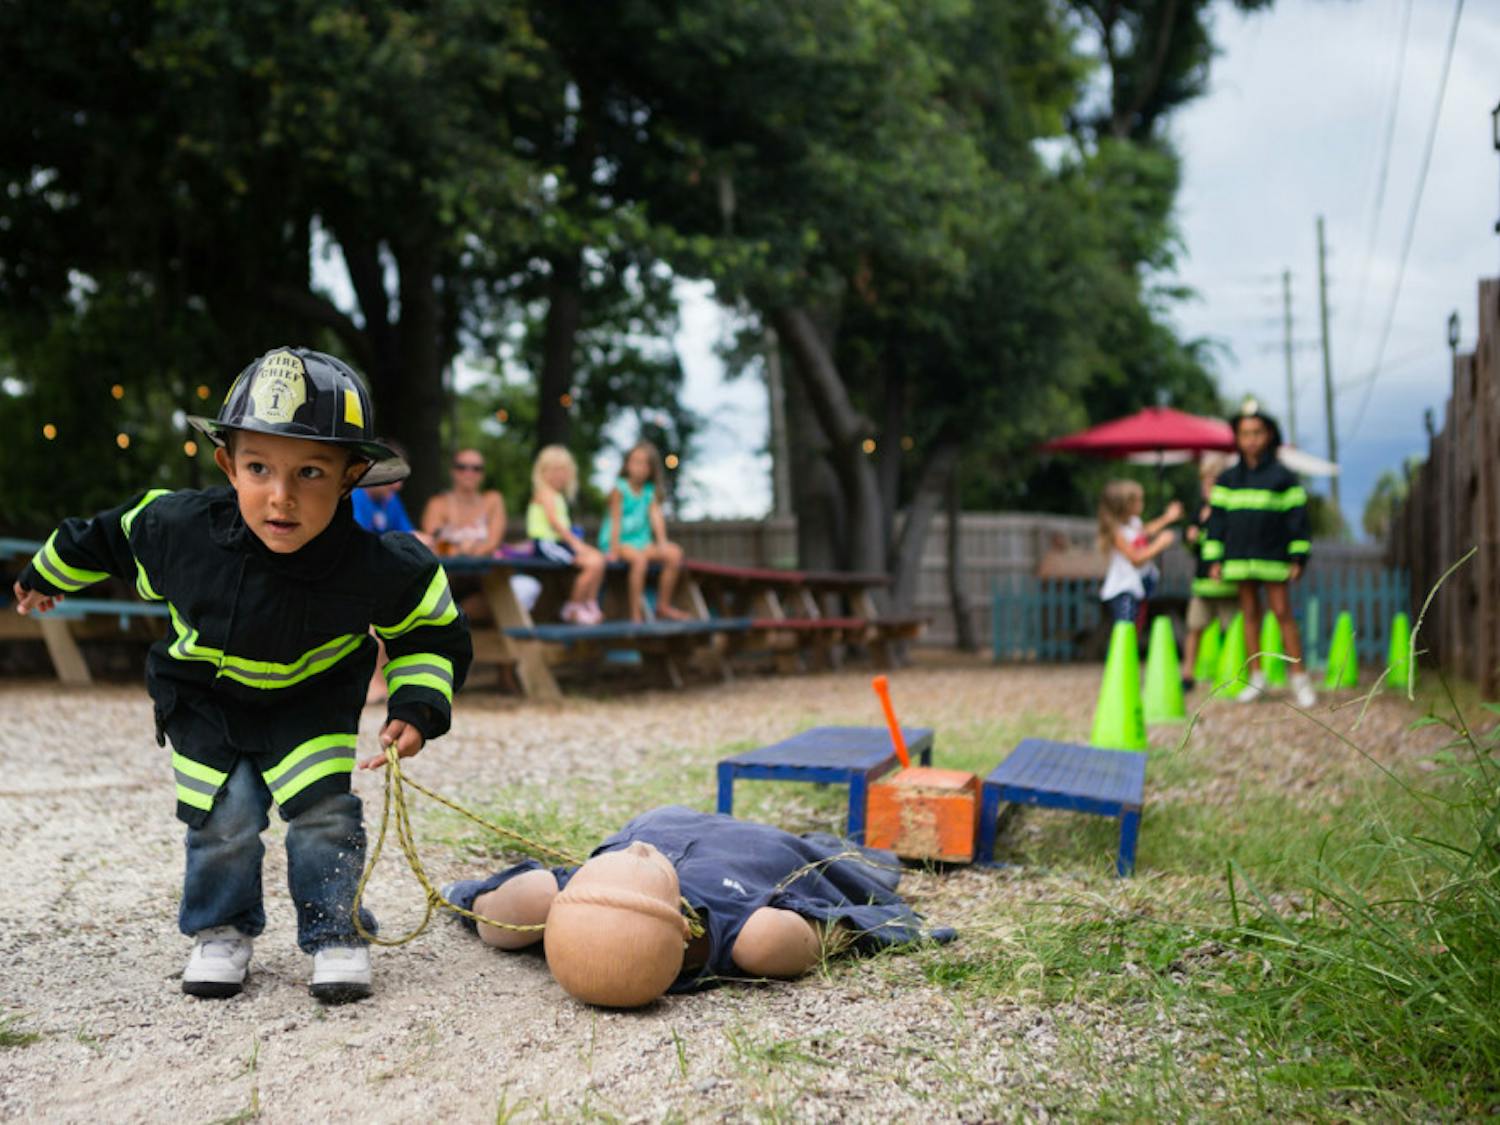 Children participated in a “Kiddie Combat” obstacle challenge during Saturday’s “Sausages for Safety” fundraiser.